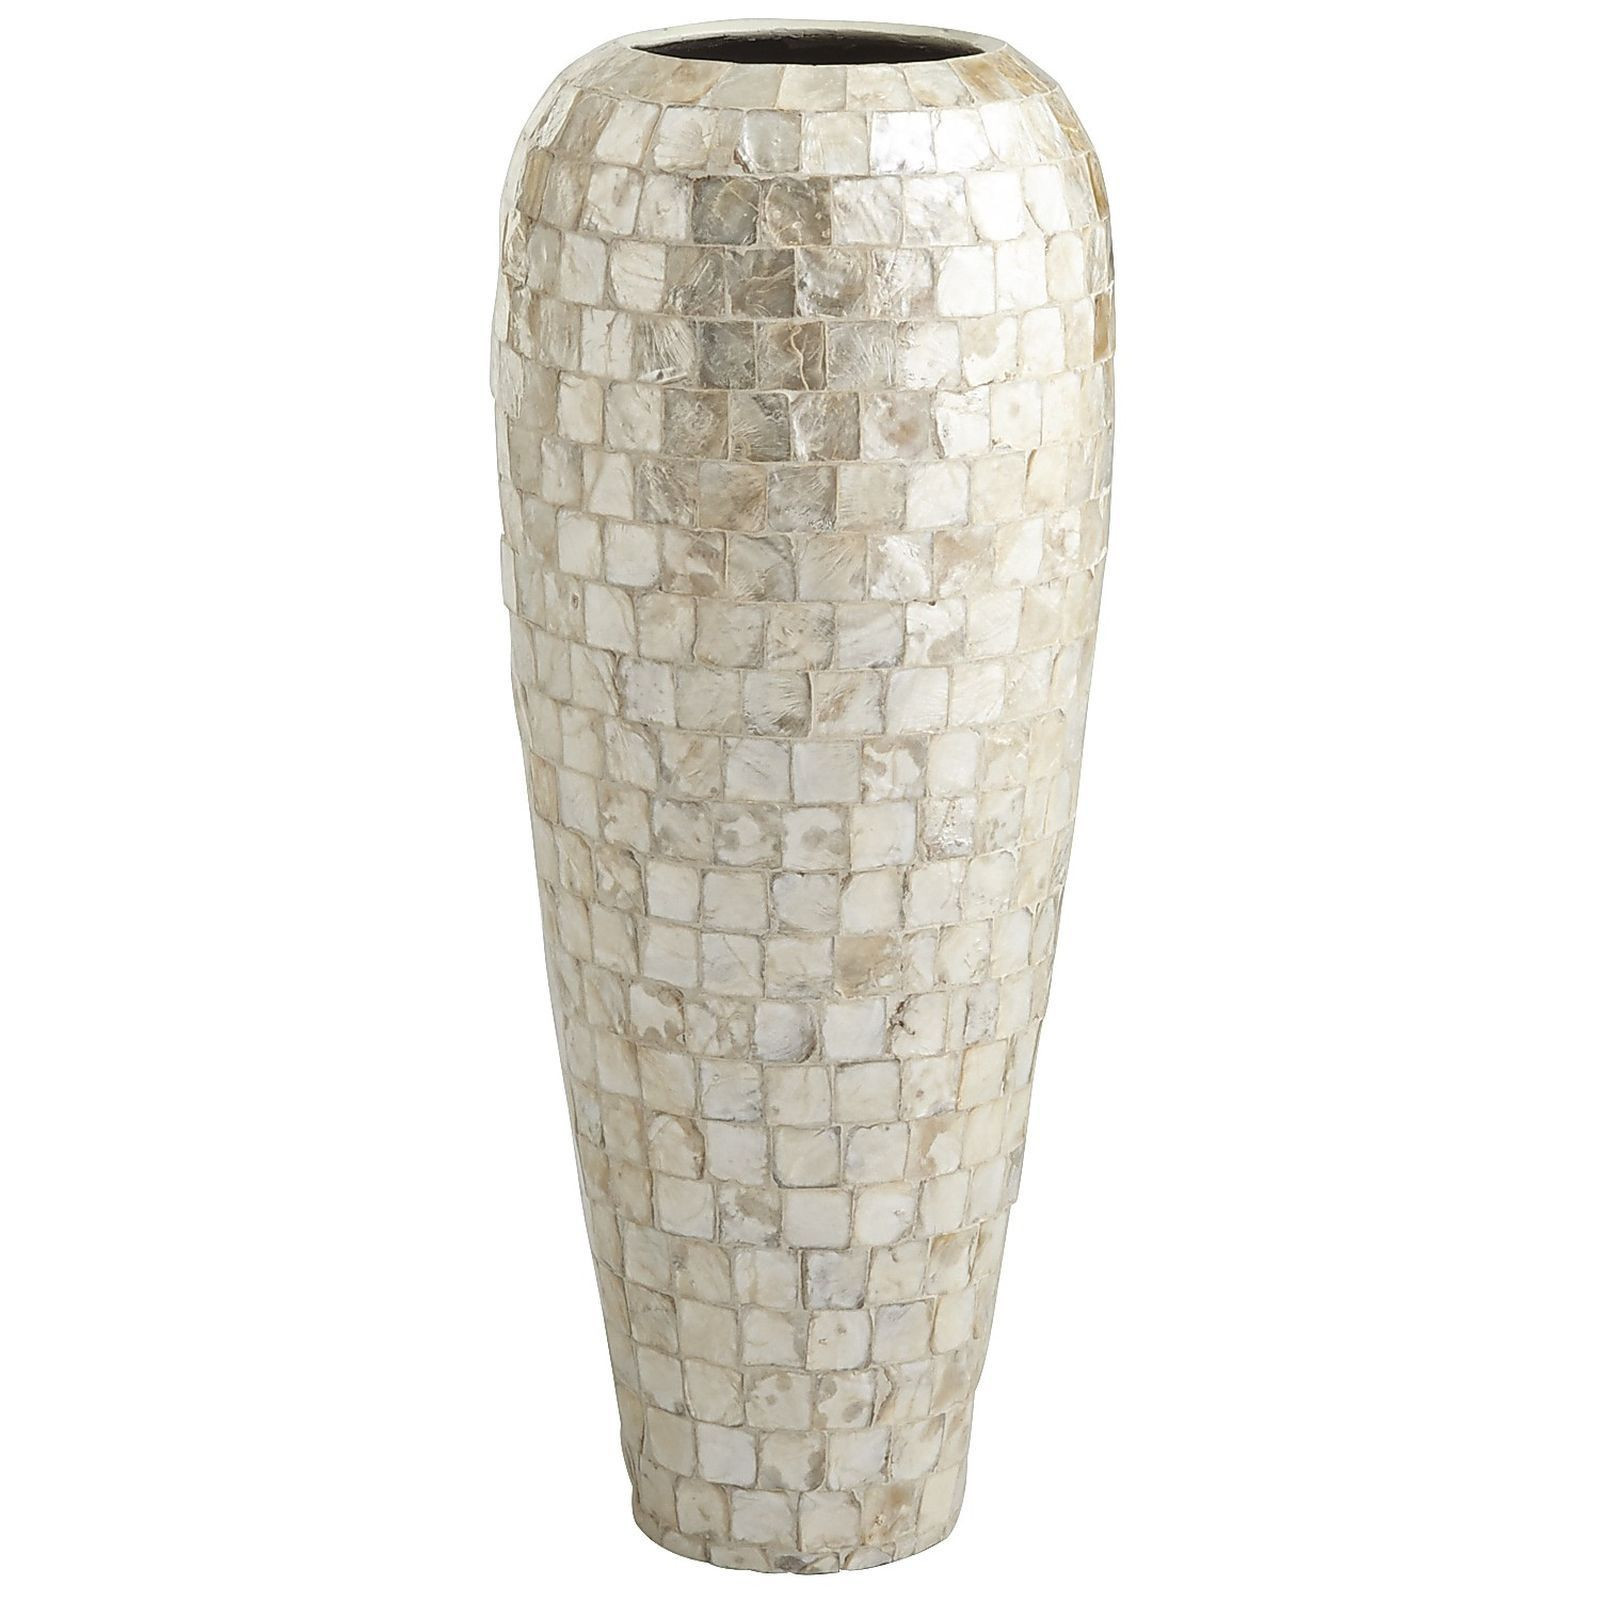 29 Cute Pier 1 Tall Vases 2024 free download pier 1 tall vases of pier 1 vases stock 48 pier 1 good thing capiz is naturally abundant throughout pier 1 vases stock 48 pier 1 good thing capiz is naturally abundant there are so